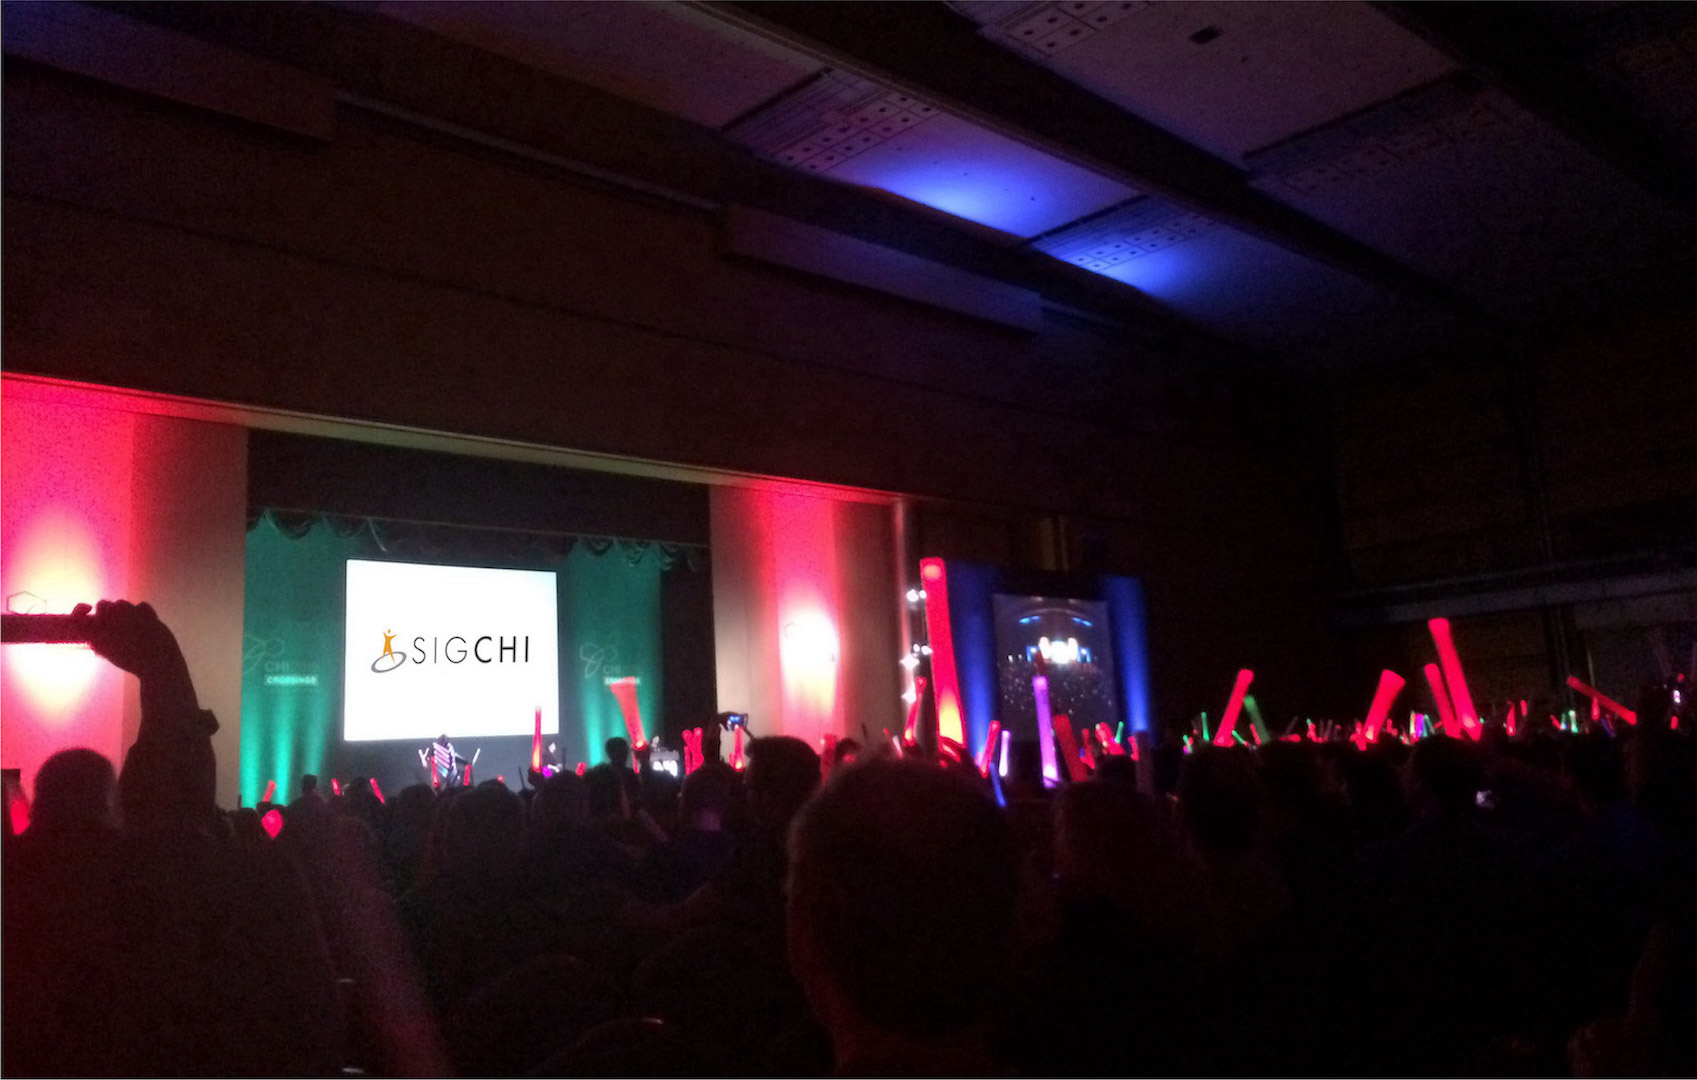 An image of the crowd during a conference keynote. In the distance, there is a stage with a screen that has "SIGCHI" projected onto it.